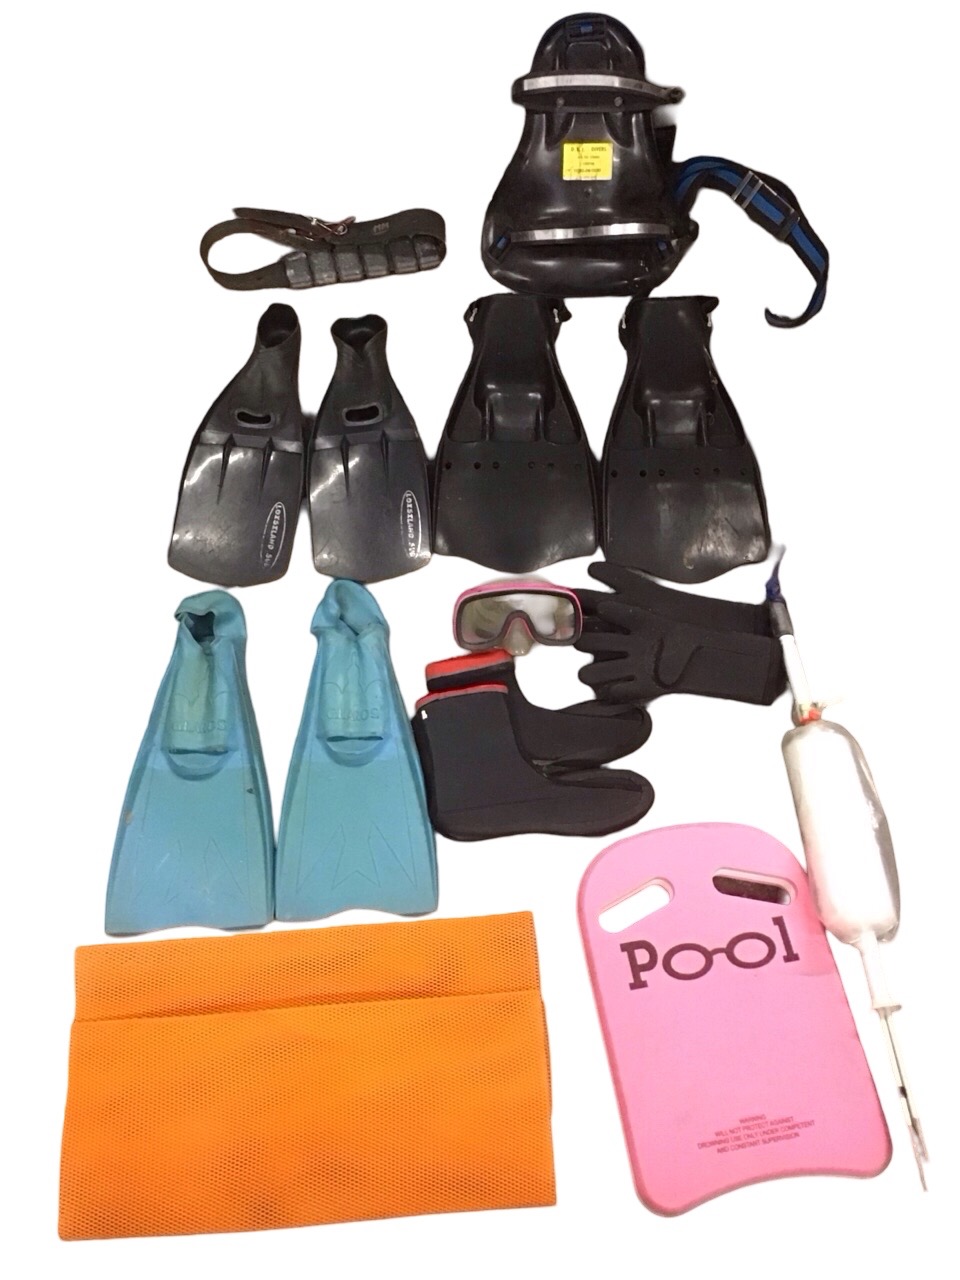 Miscellaneous diving equipment including a Namron scuba tank harness, a floater board, a pair of